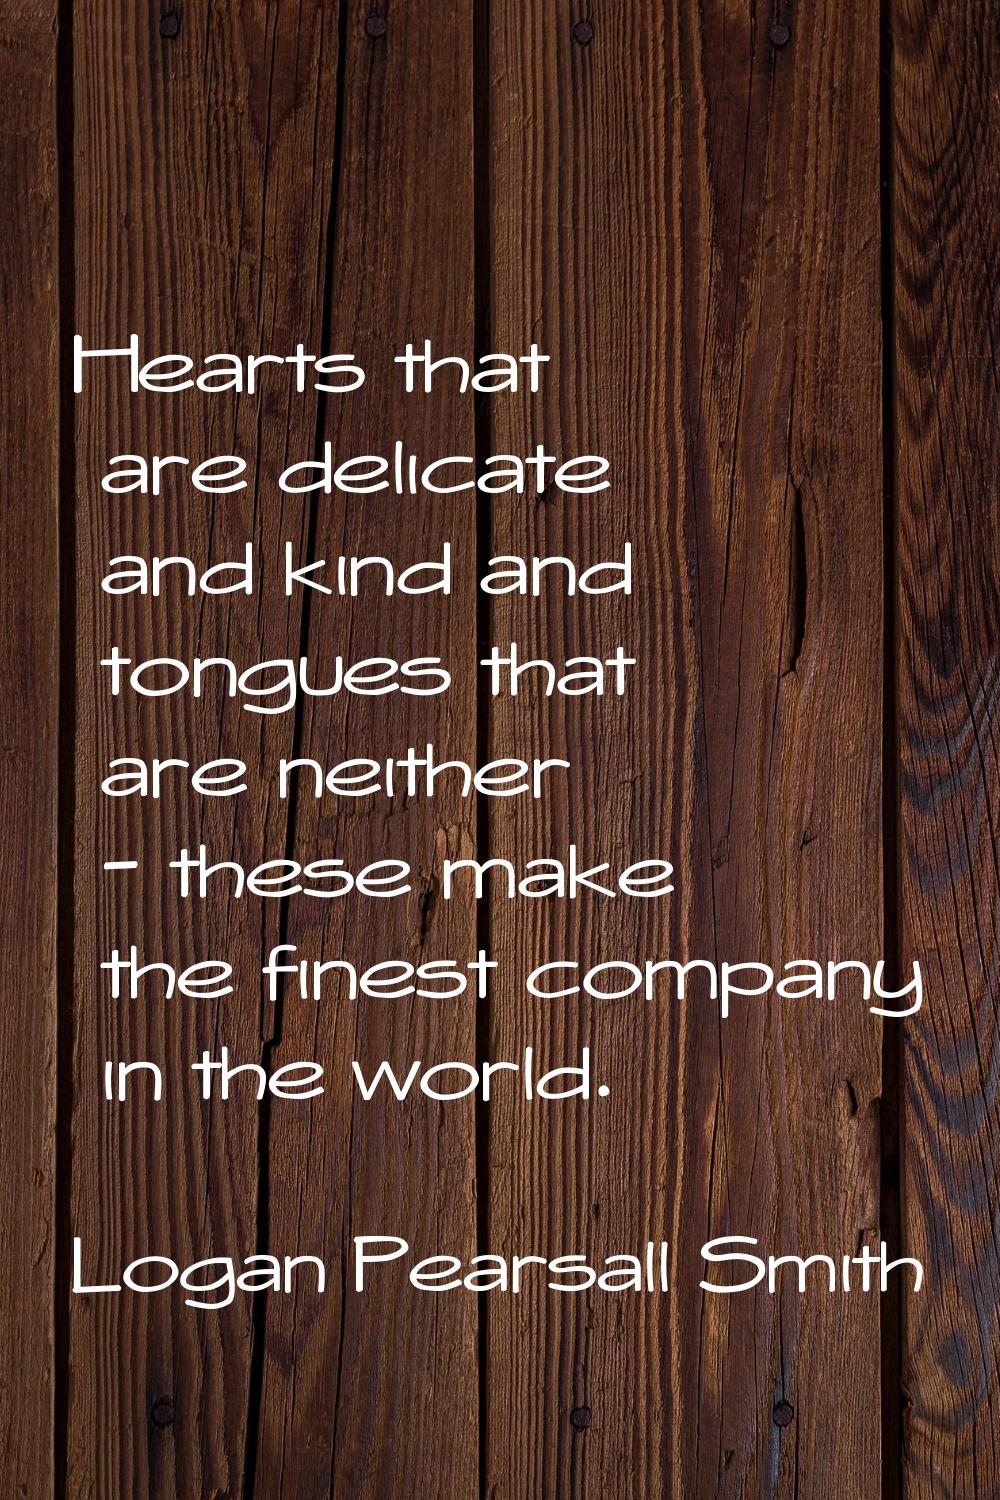 Hearts that are delicate and kind and tongues that are neither - these make the finest company in t